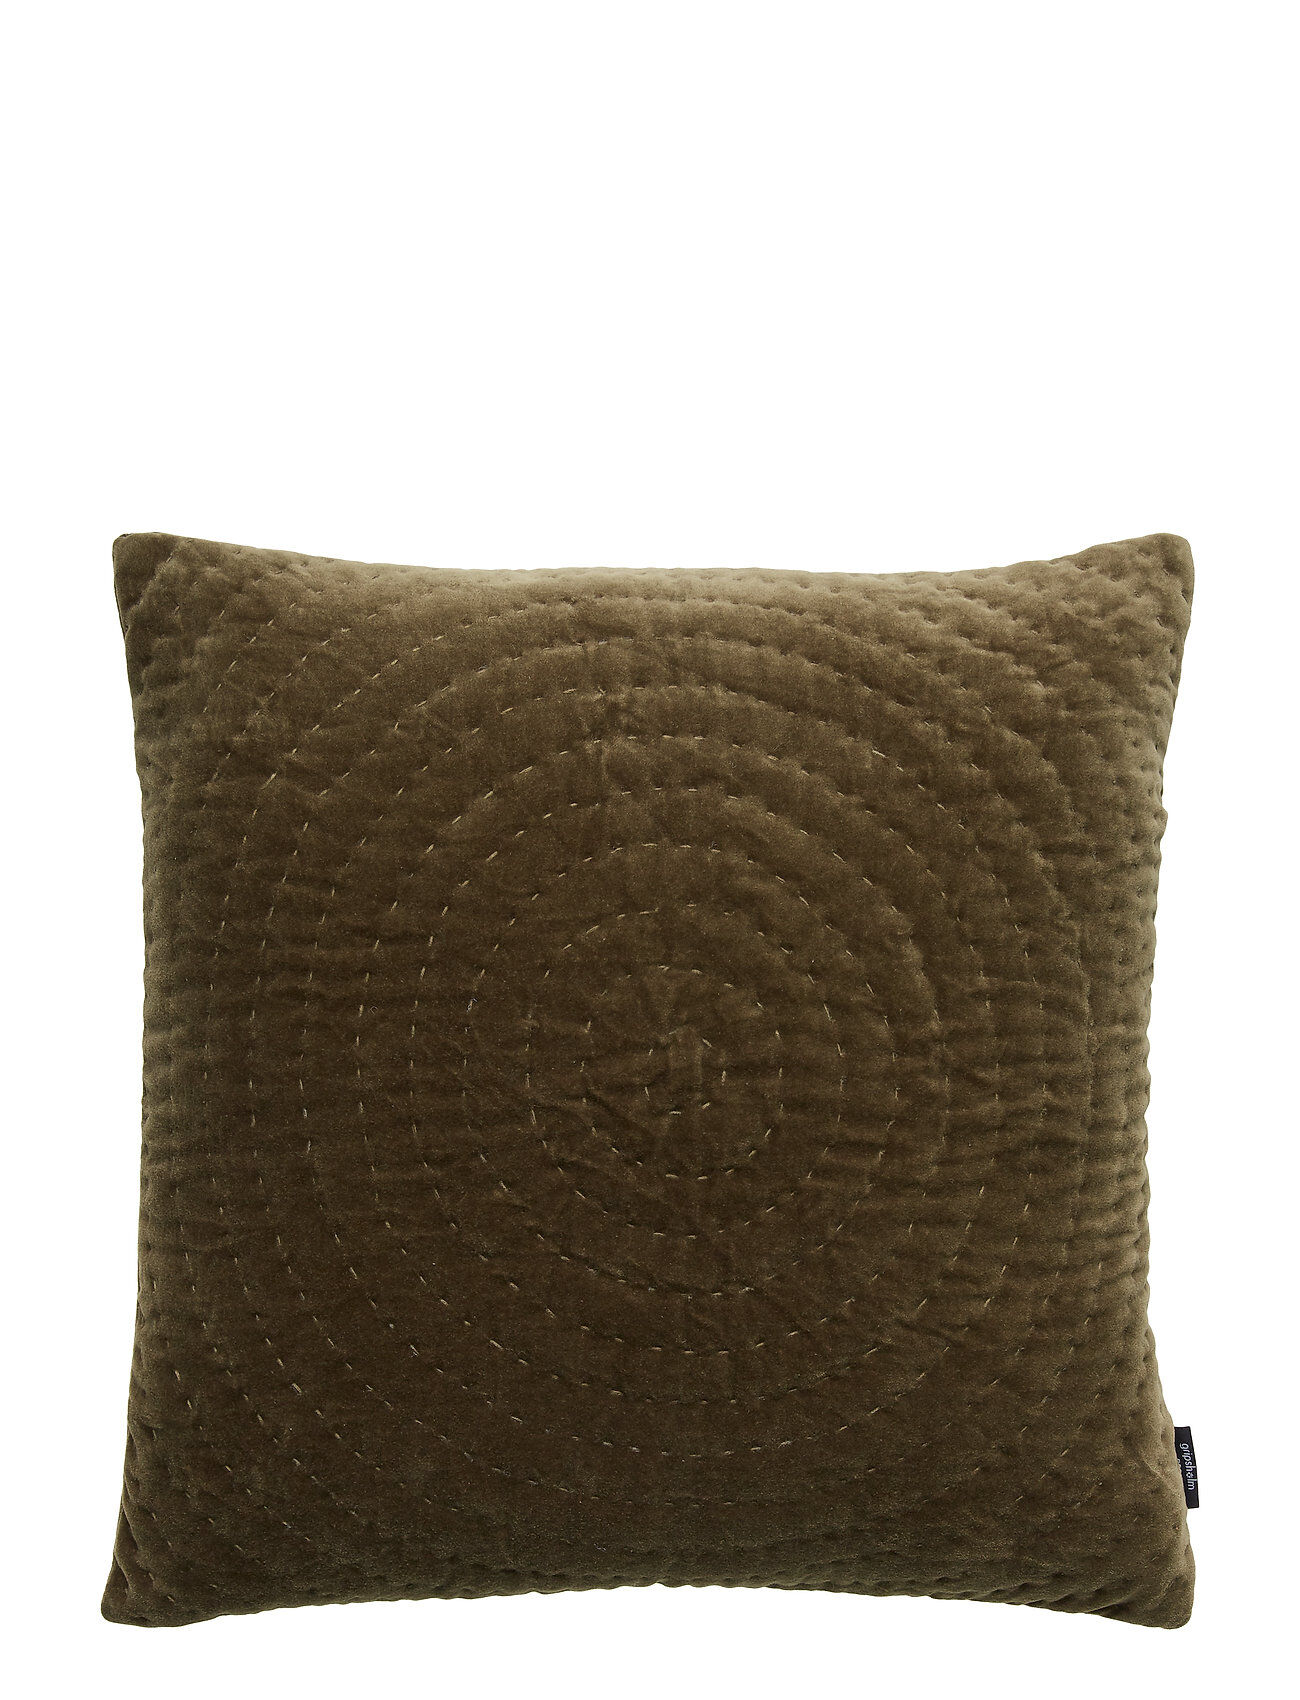 Gripsholm Cushion Cover Ossian Gots Home Textiles Cushions & Blankets Cushion Covers Brun Gripsholm